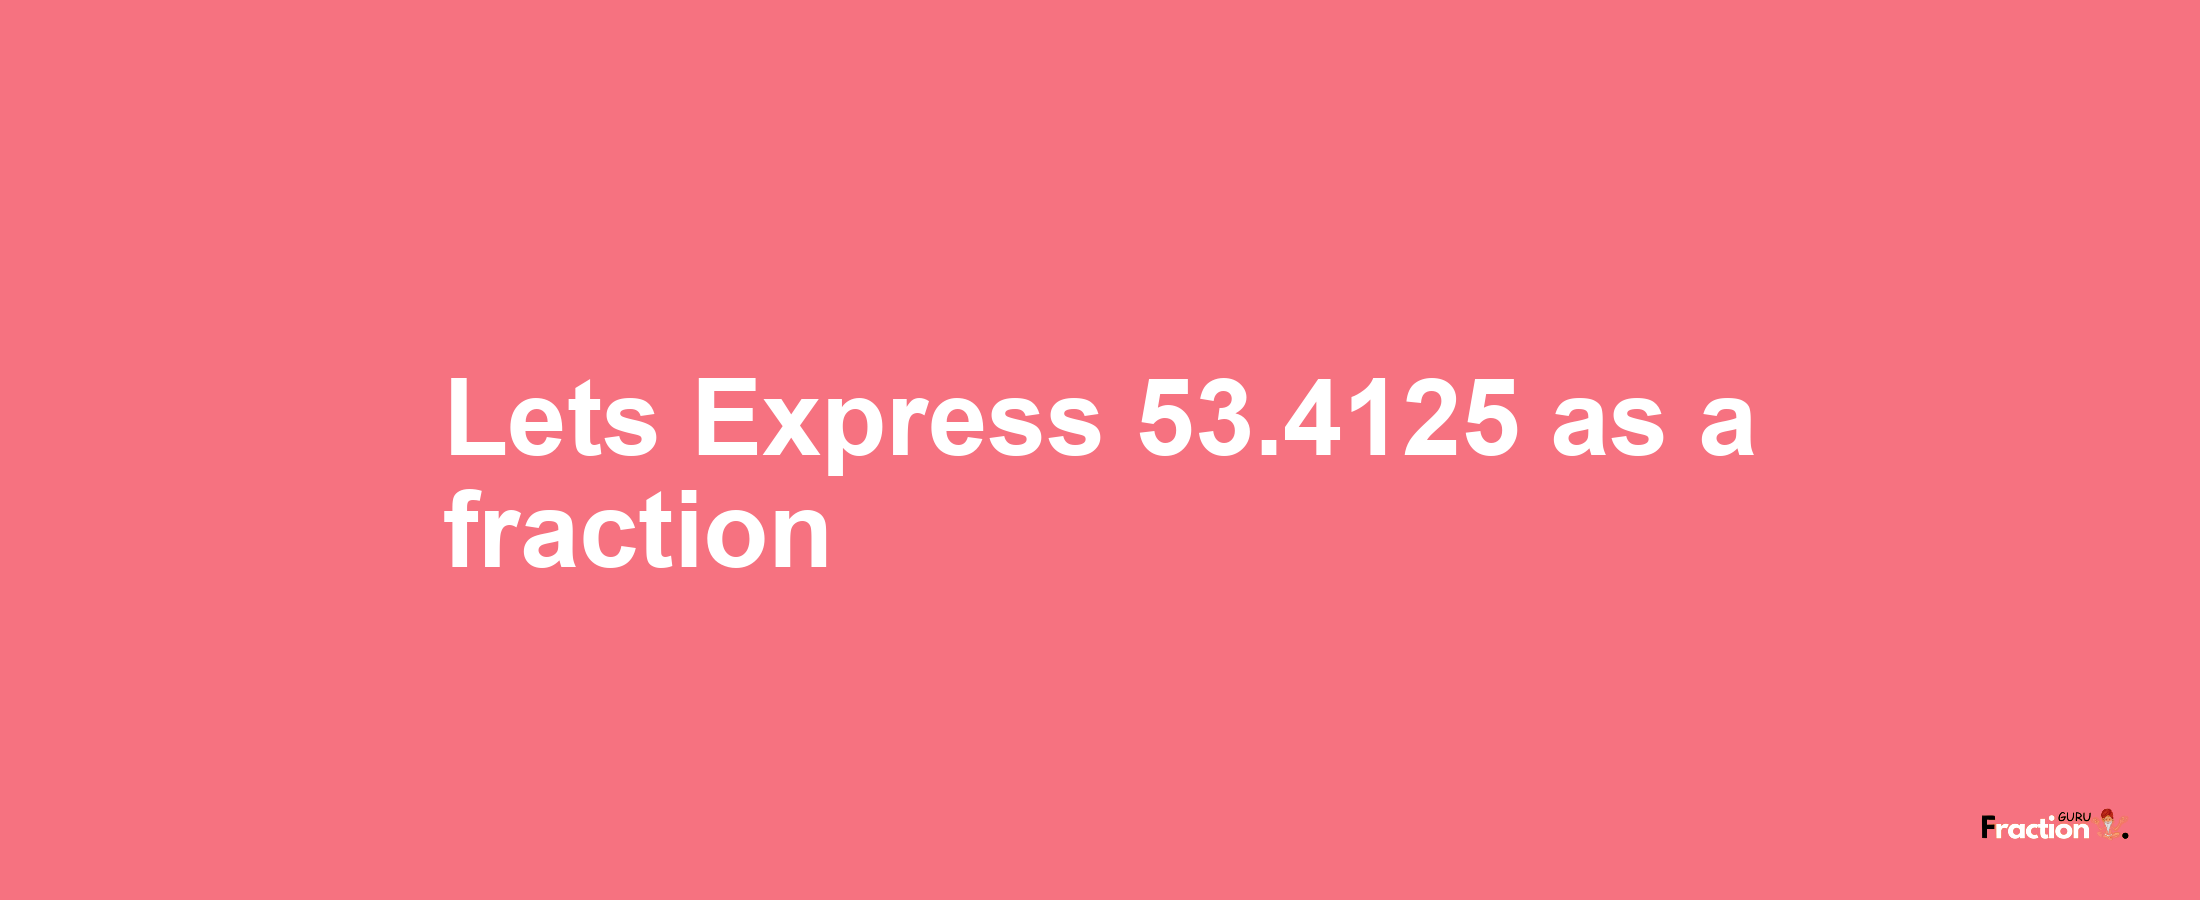 Lets Express 53.4125 as afraction